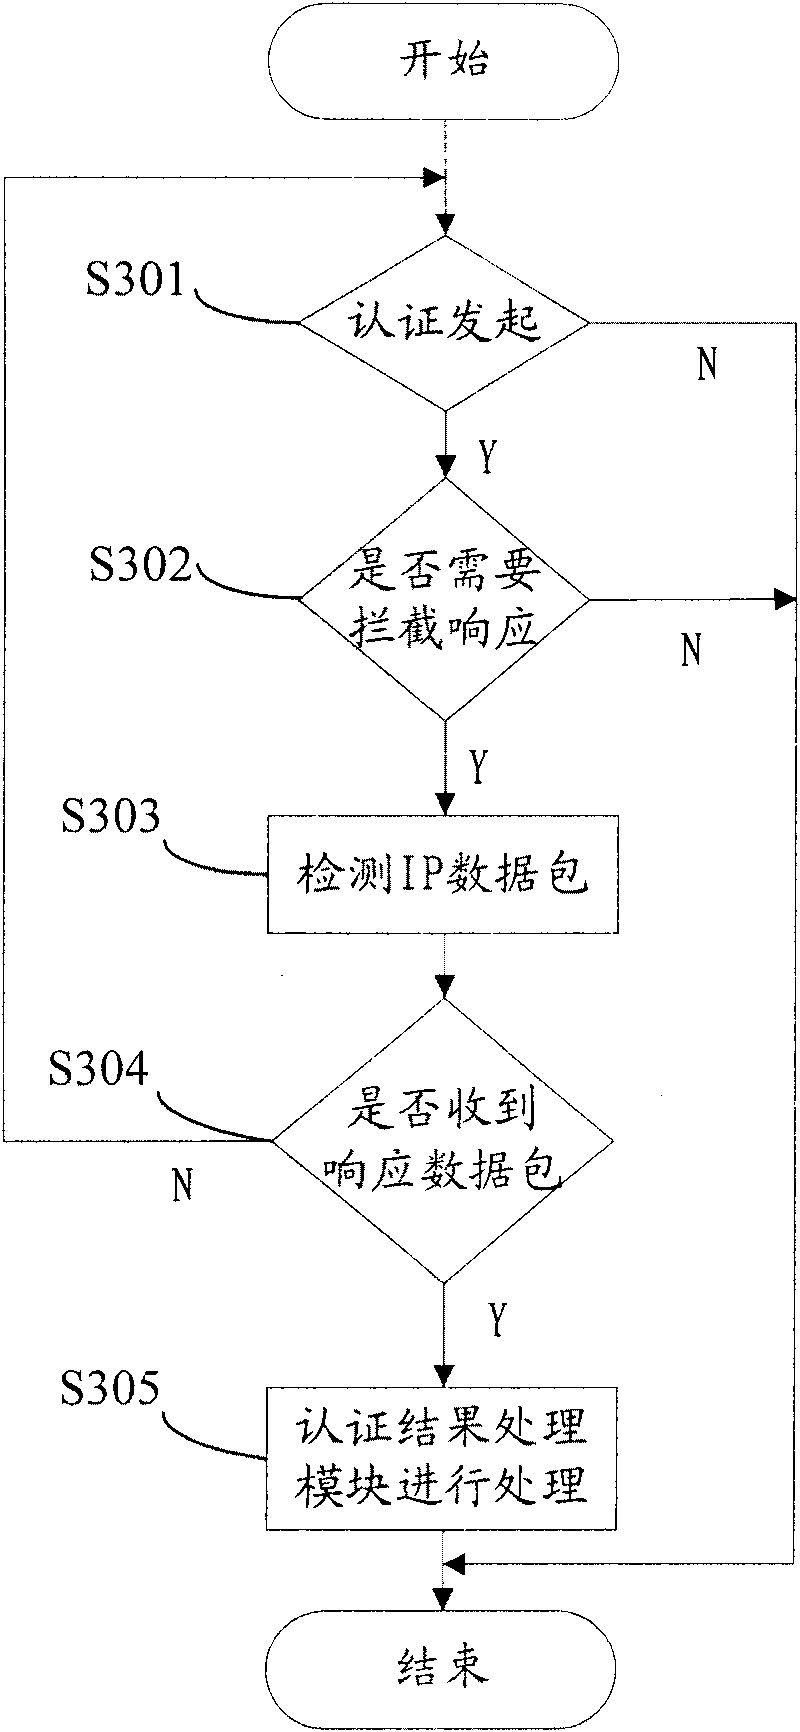 Anti-counterfeiting terminal and anti-counterfeiting method and system thereof